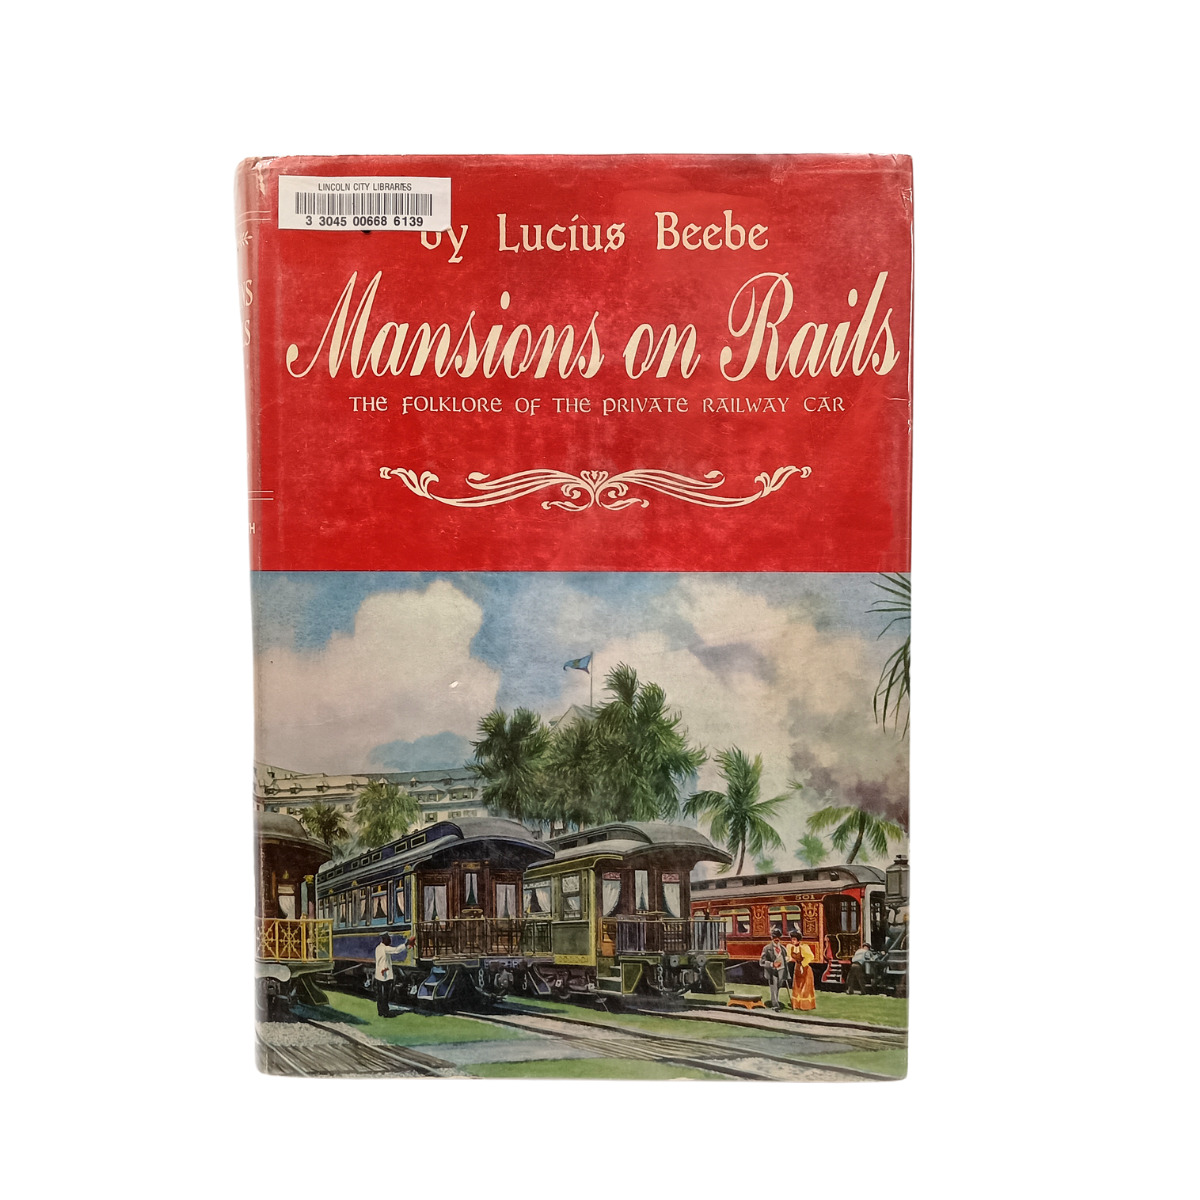 Vtg MANSIONS ON RAILS Folklore Of The Private Railway Car Lucius Beebe 1959 HCDJ